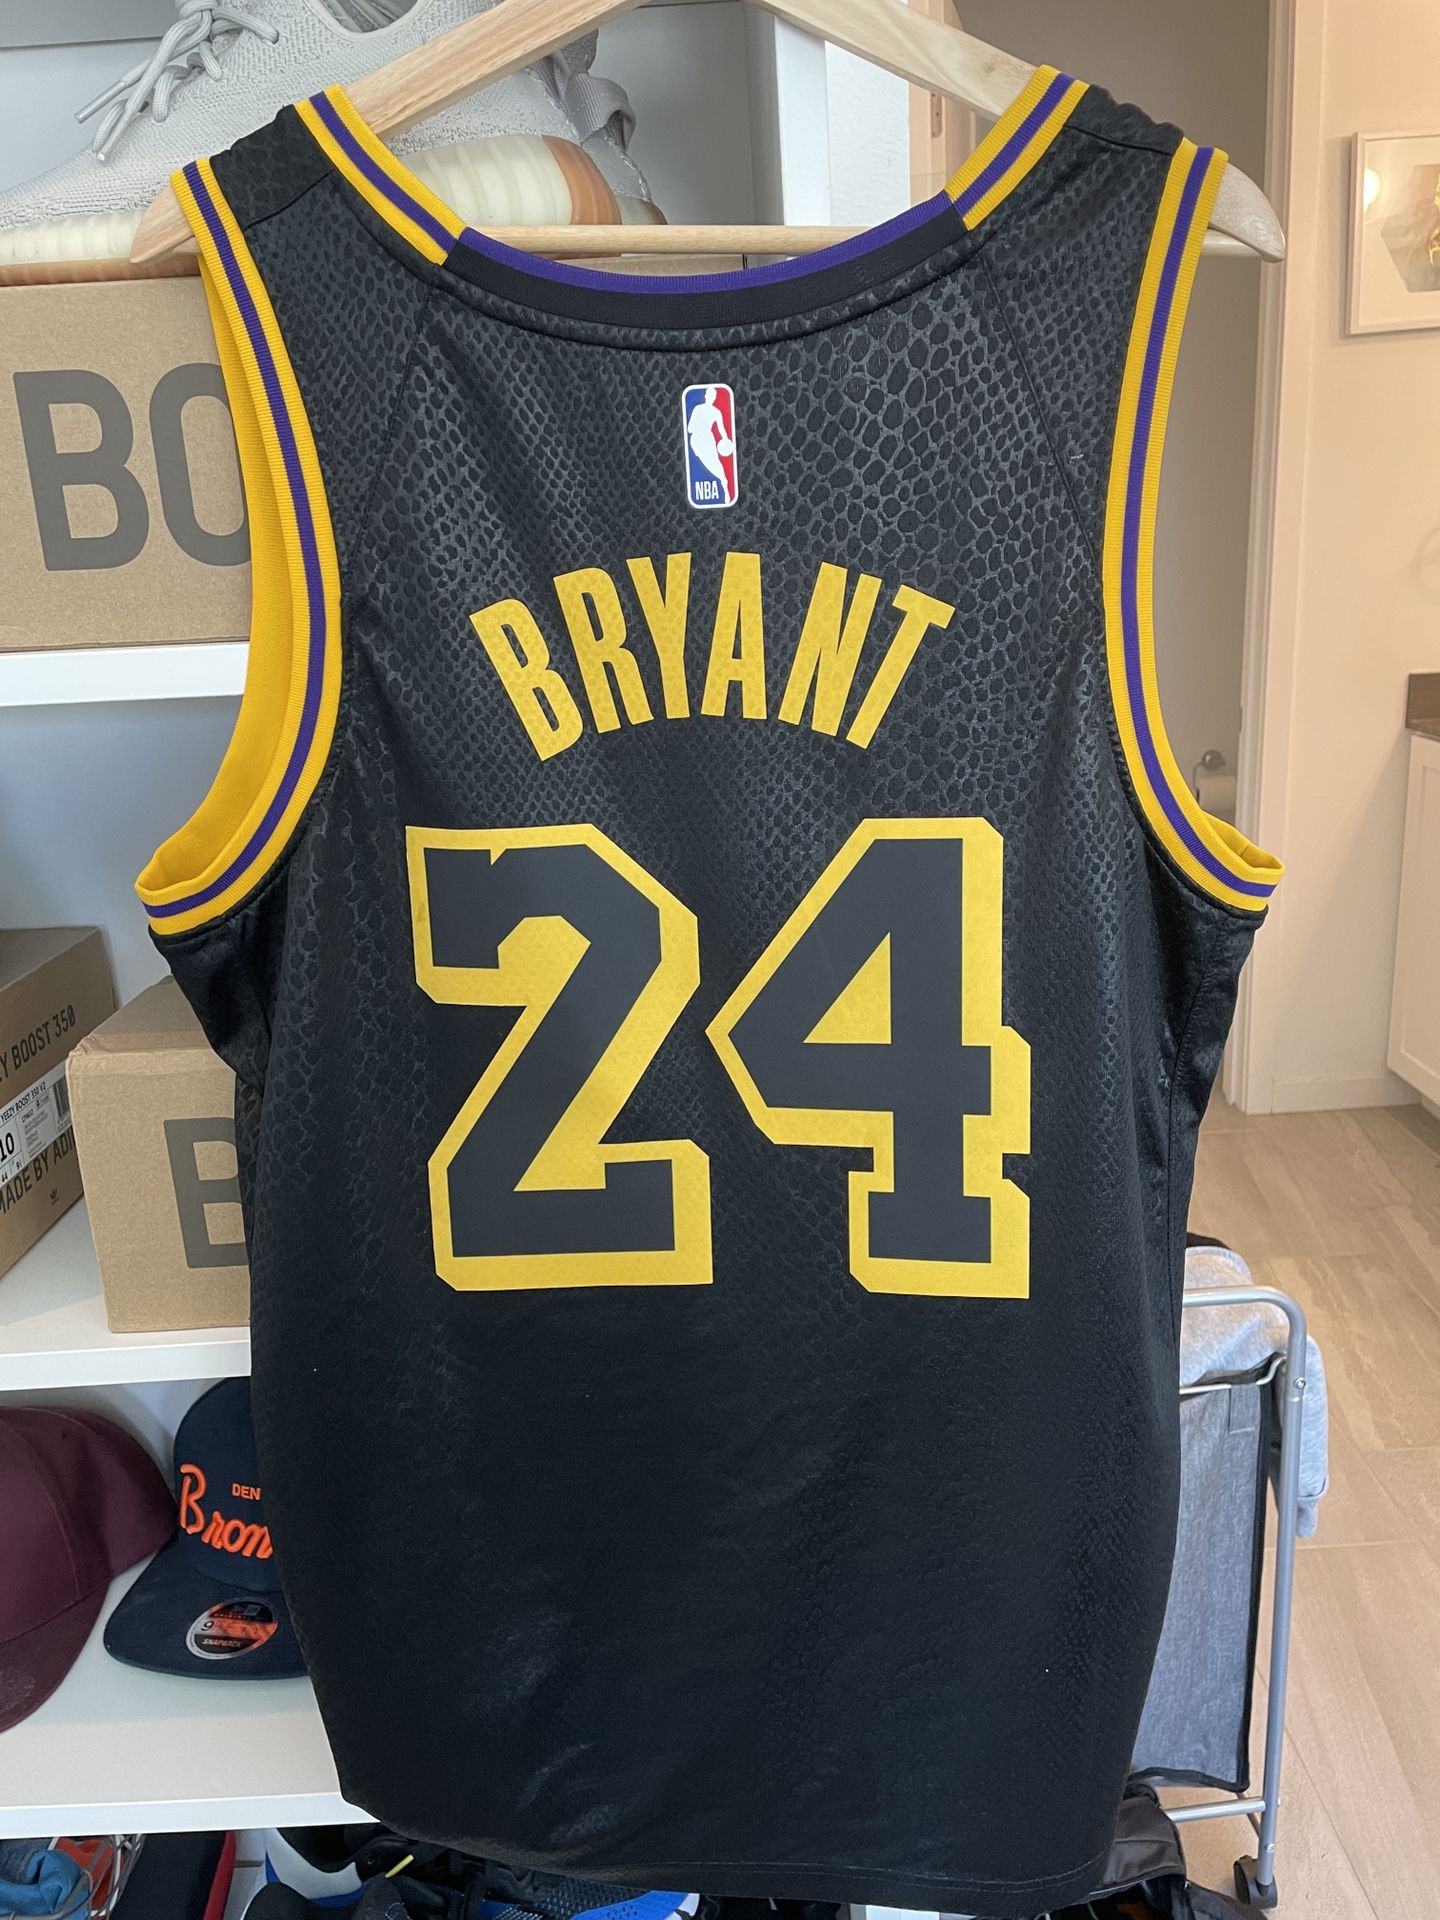 Kobe Bryant Lakers Black Mamba Nba Basketball Jersey Size xL Nwt for Sale  in Demarest, NJ - OfferUp